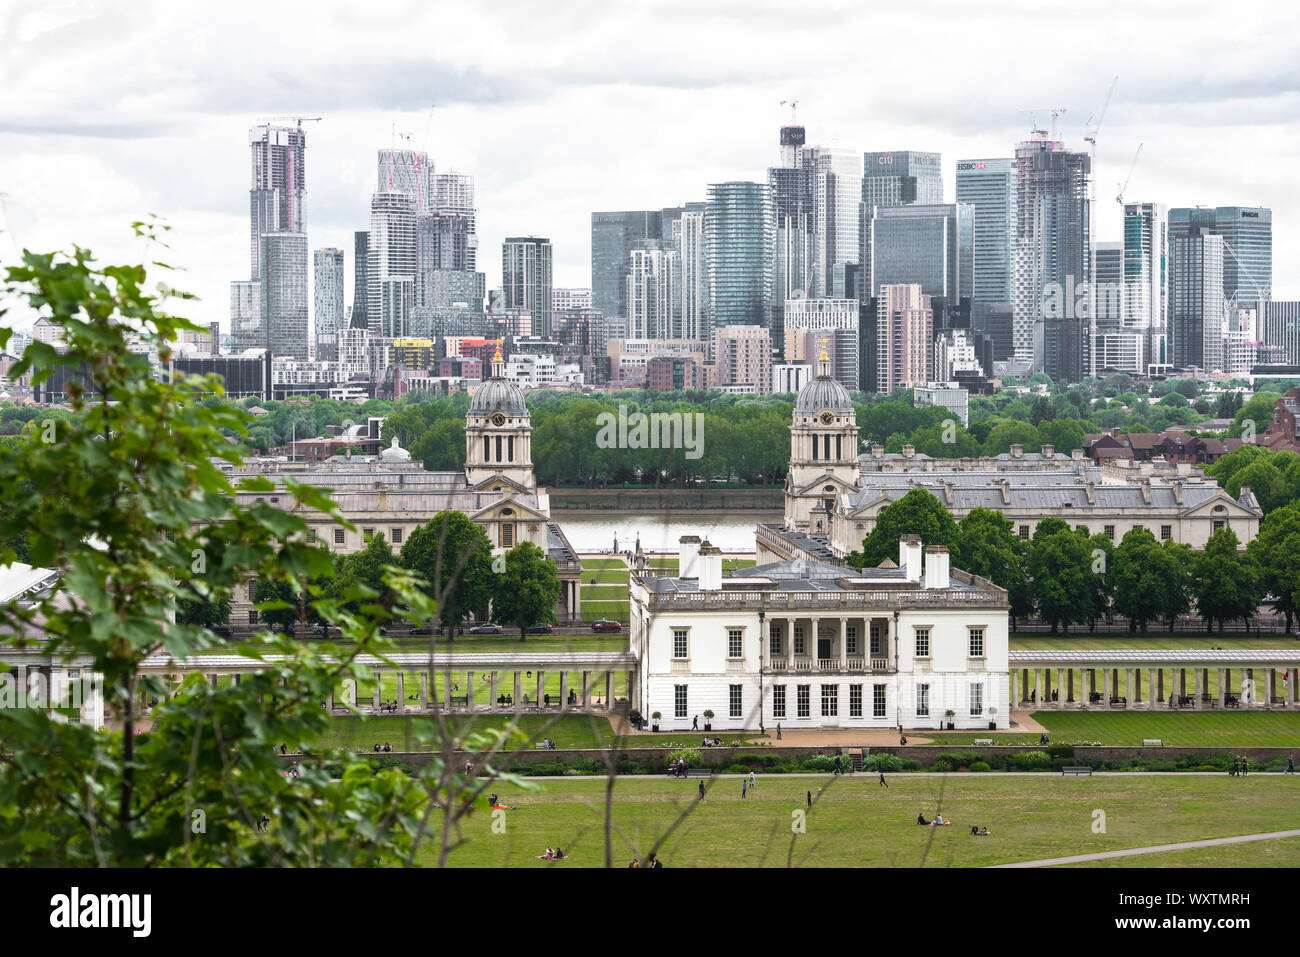 View from the Greenwich Royal Observatory, looking across Greenwich Park towards Canary Wharf and the River Thames, London, England, UK Stock Photo